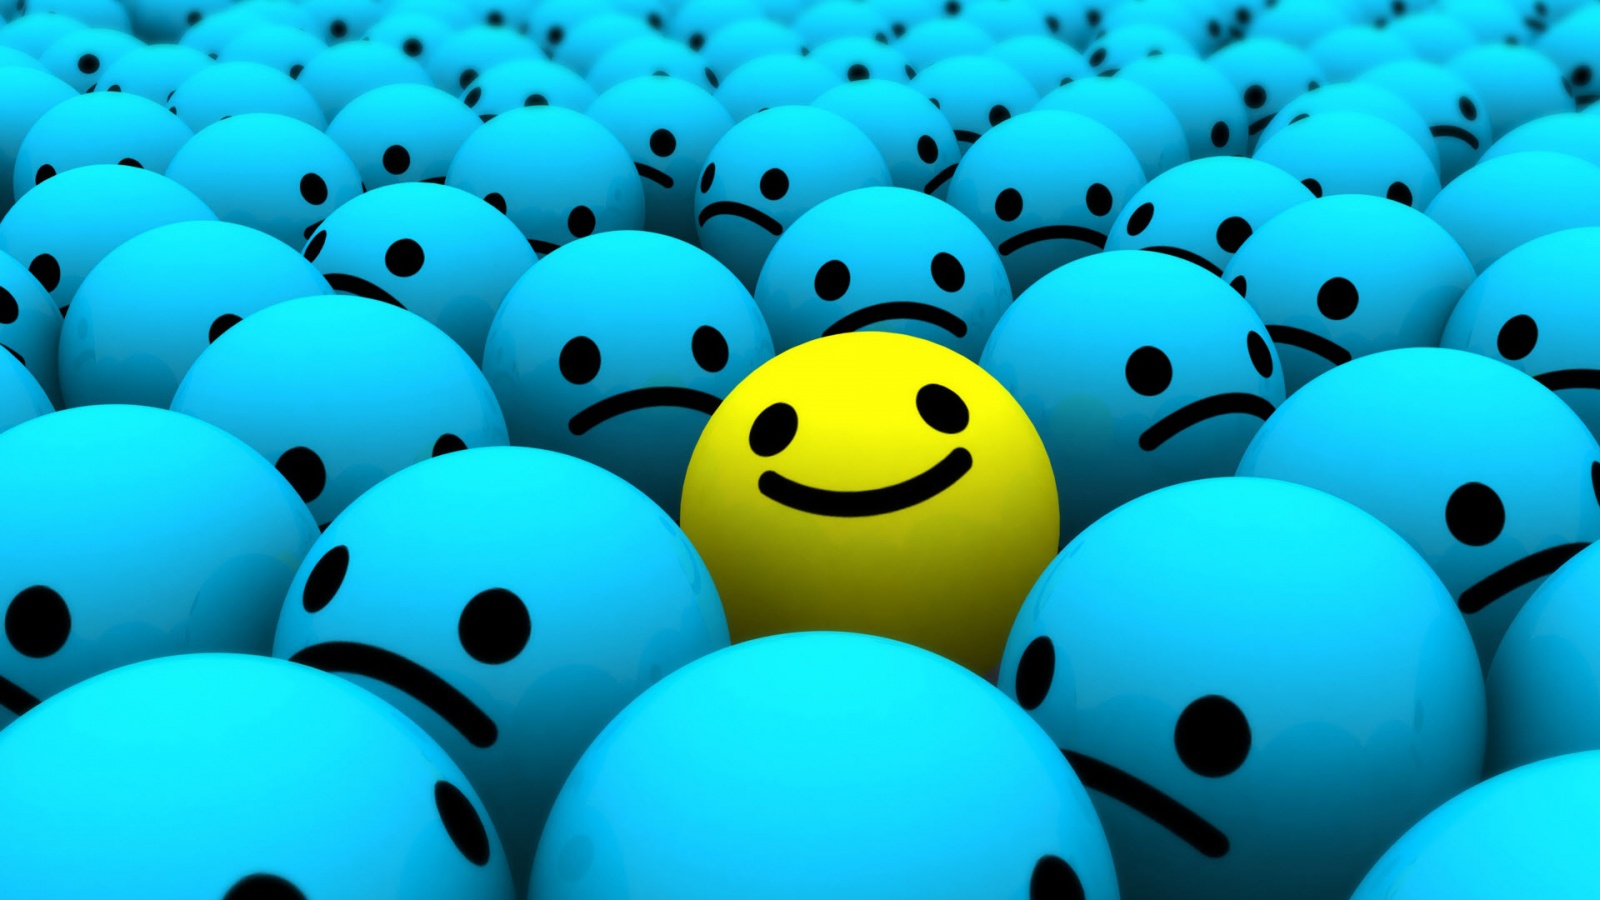 Smiley Faces Photo - Odd One Out Smiley Face - HD Wallpaper 